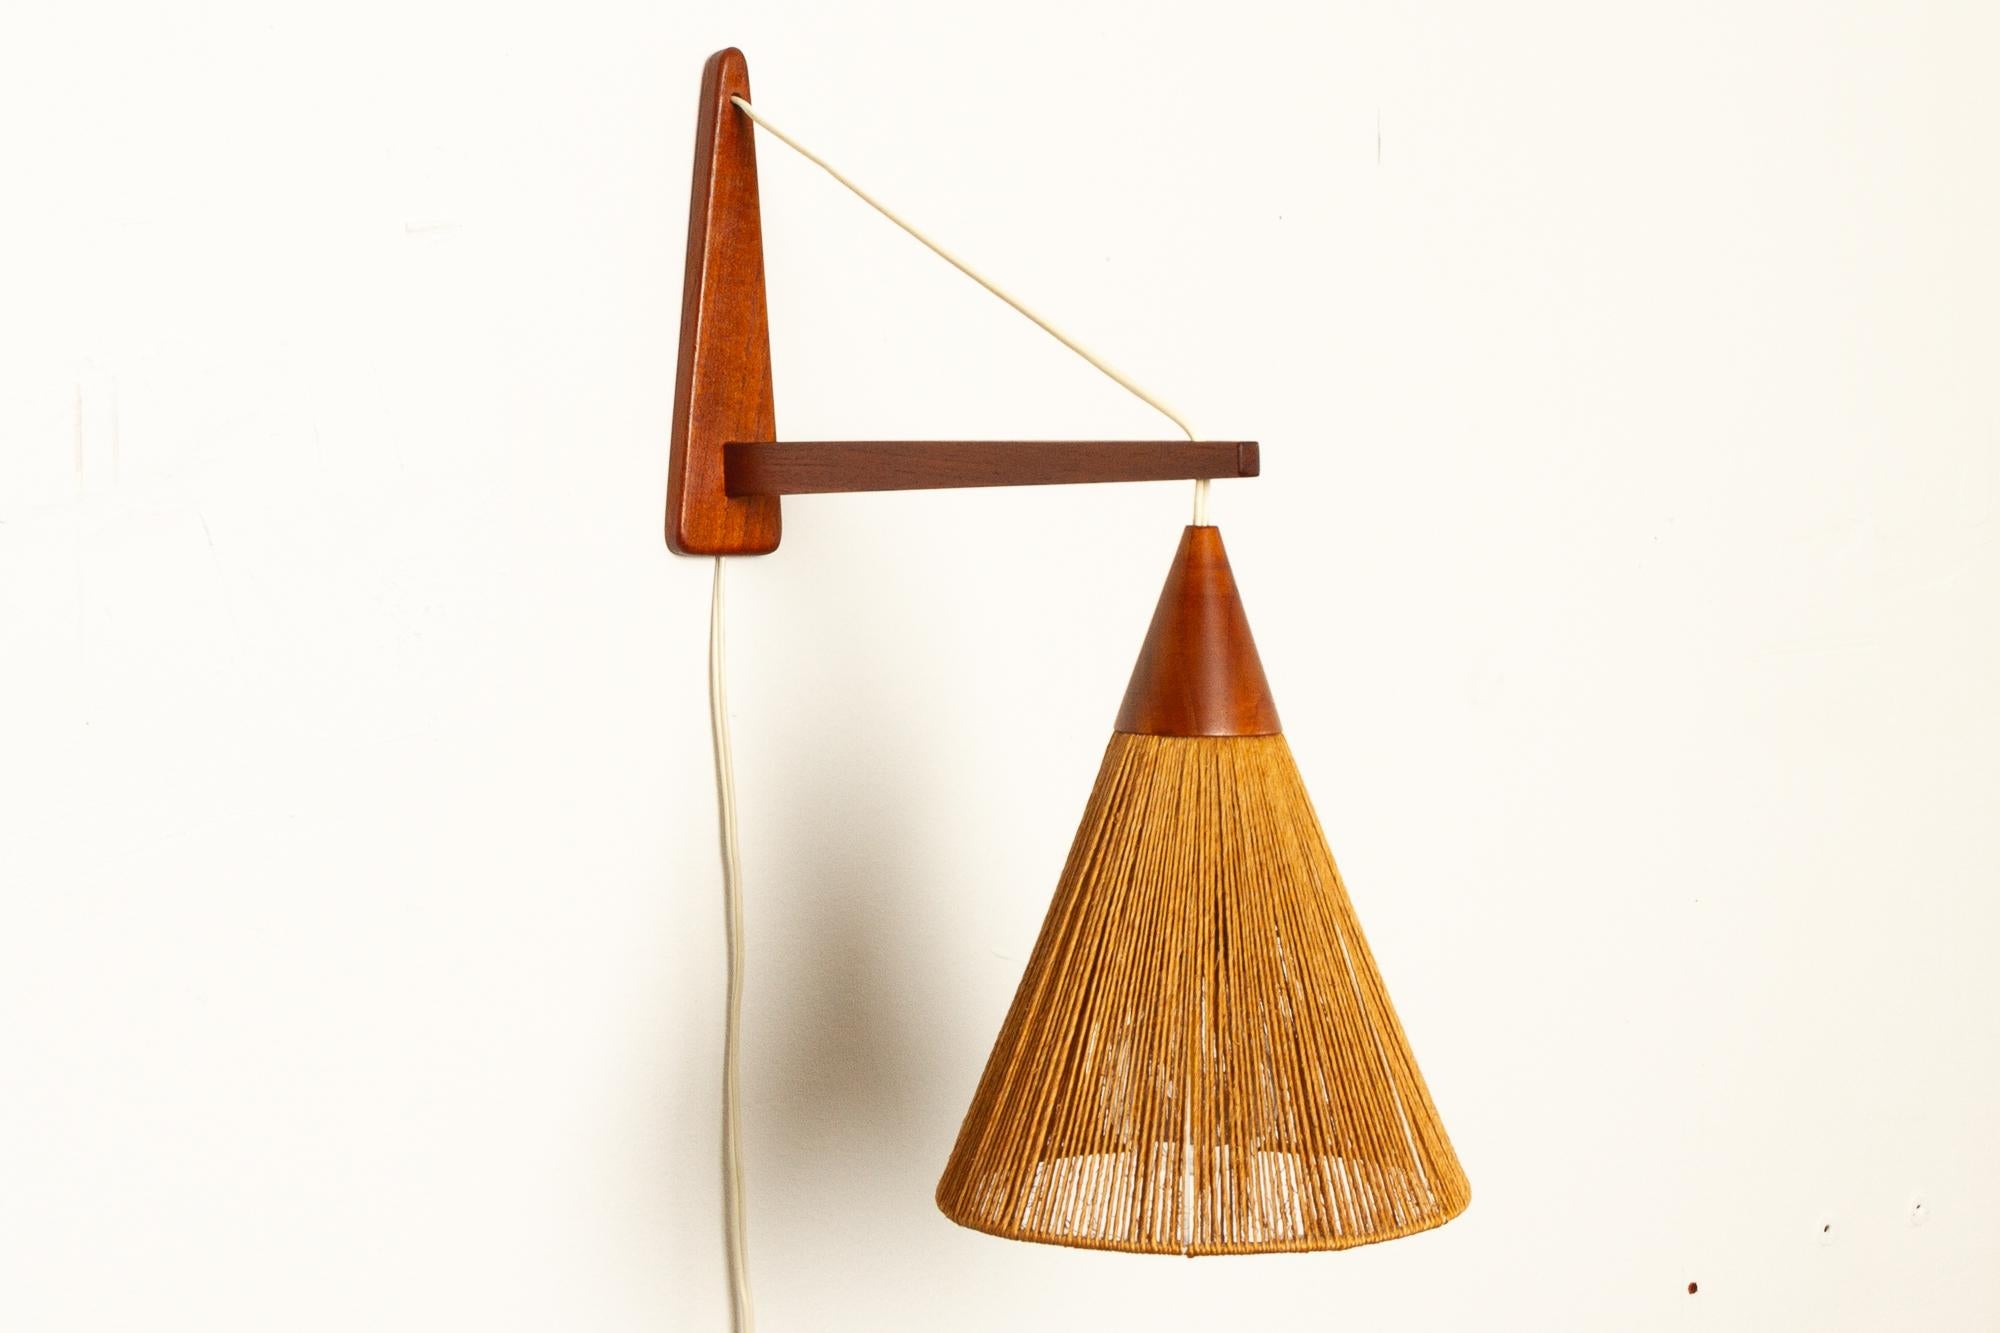 Danish teak wall light by Ib Fabiansen for Fog og Mørup, 1960s.
Danish modern wall lamp in solid teak with shade woven with jute / hemp cords / string. Rarely seen model. Gives off a very cosy and diffused light. Perfect for Danish hygge.
Very